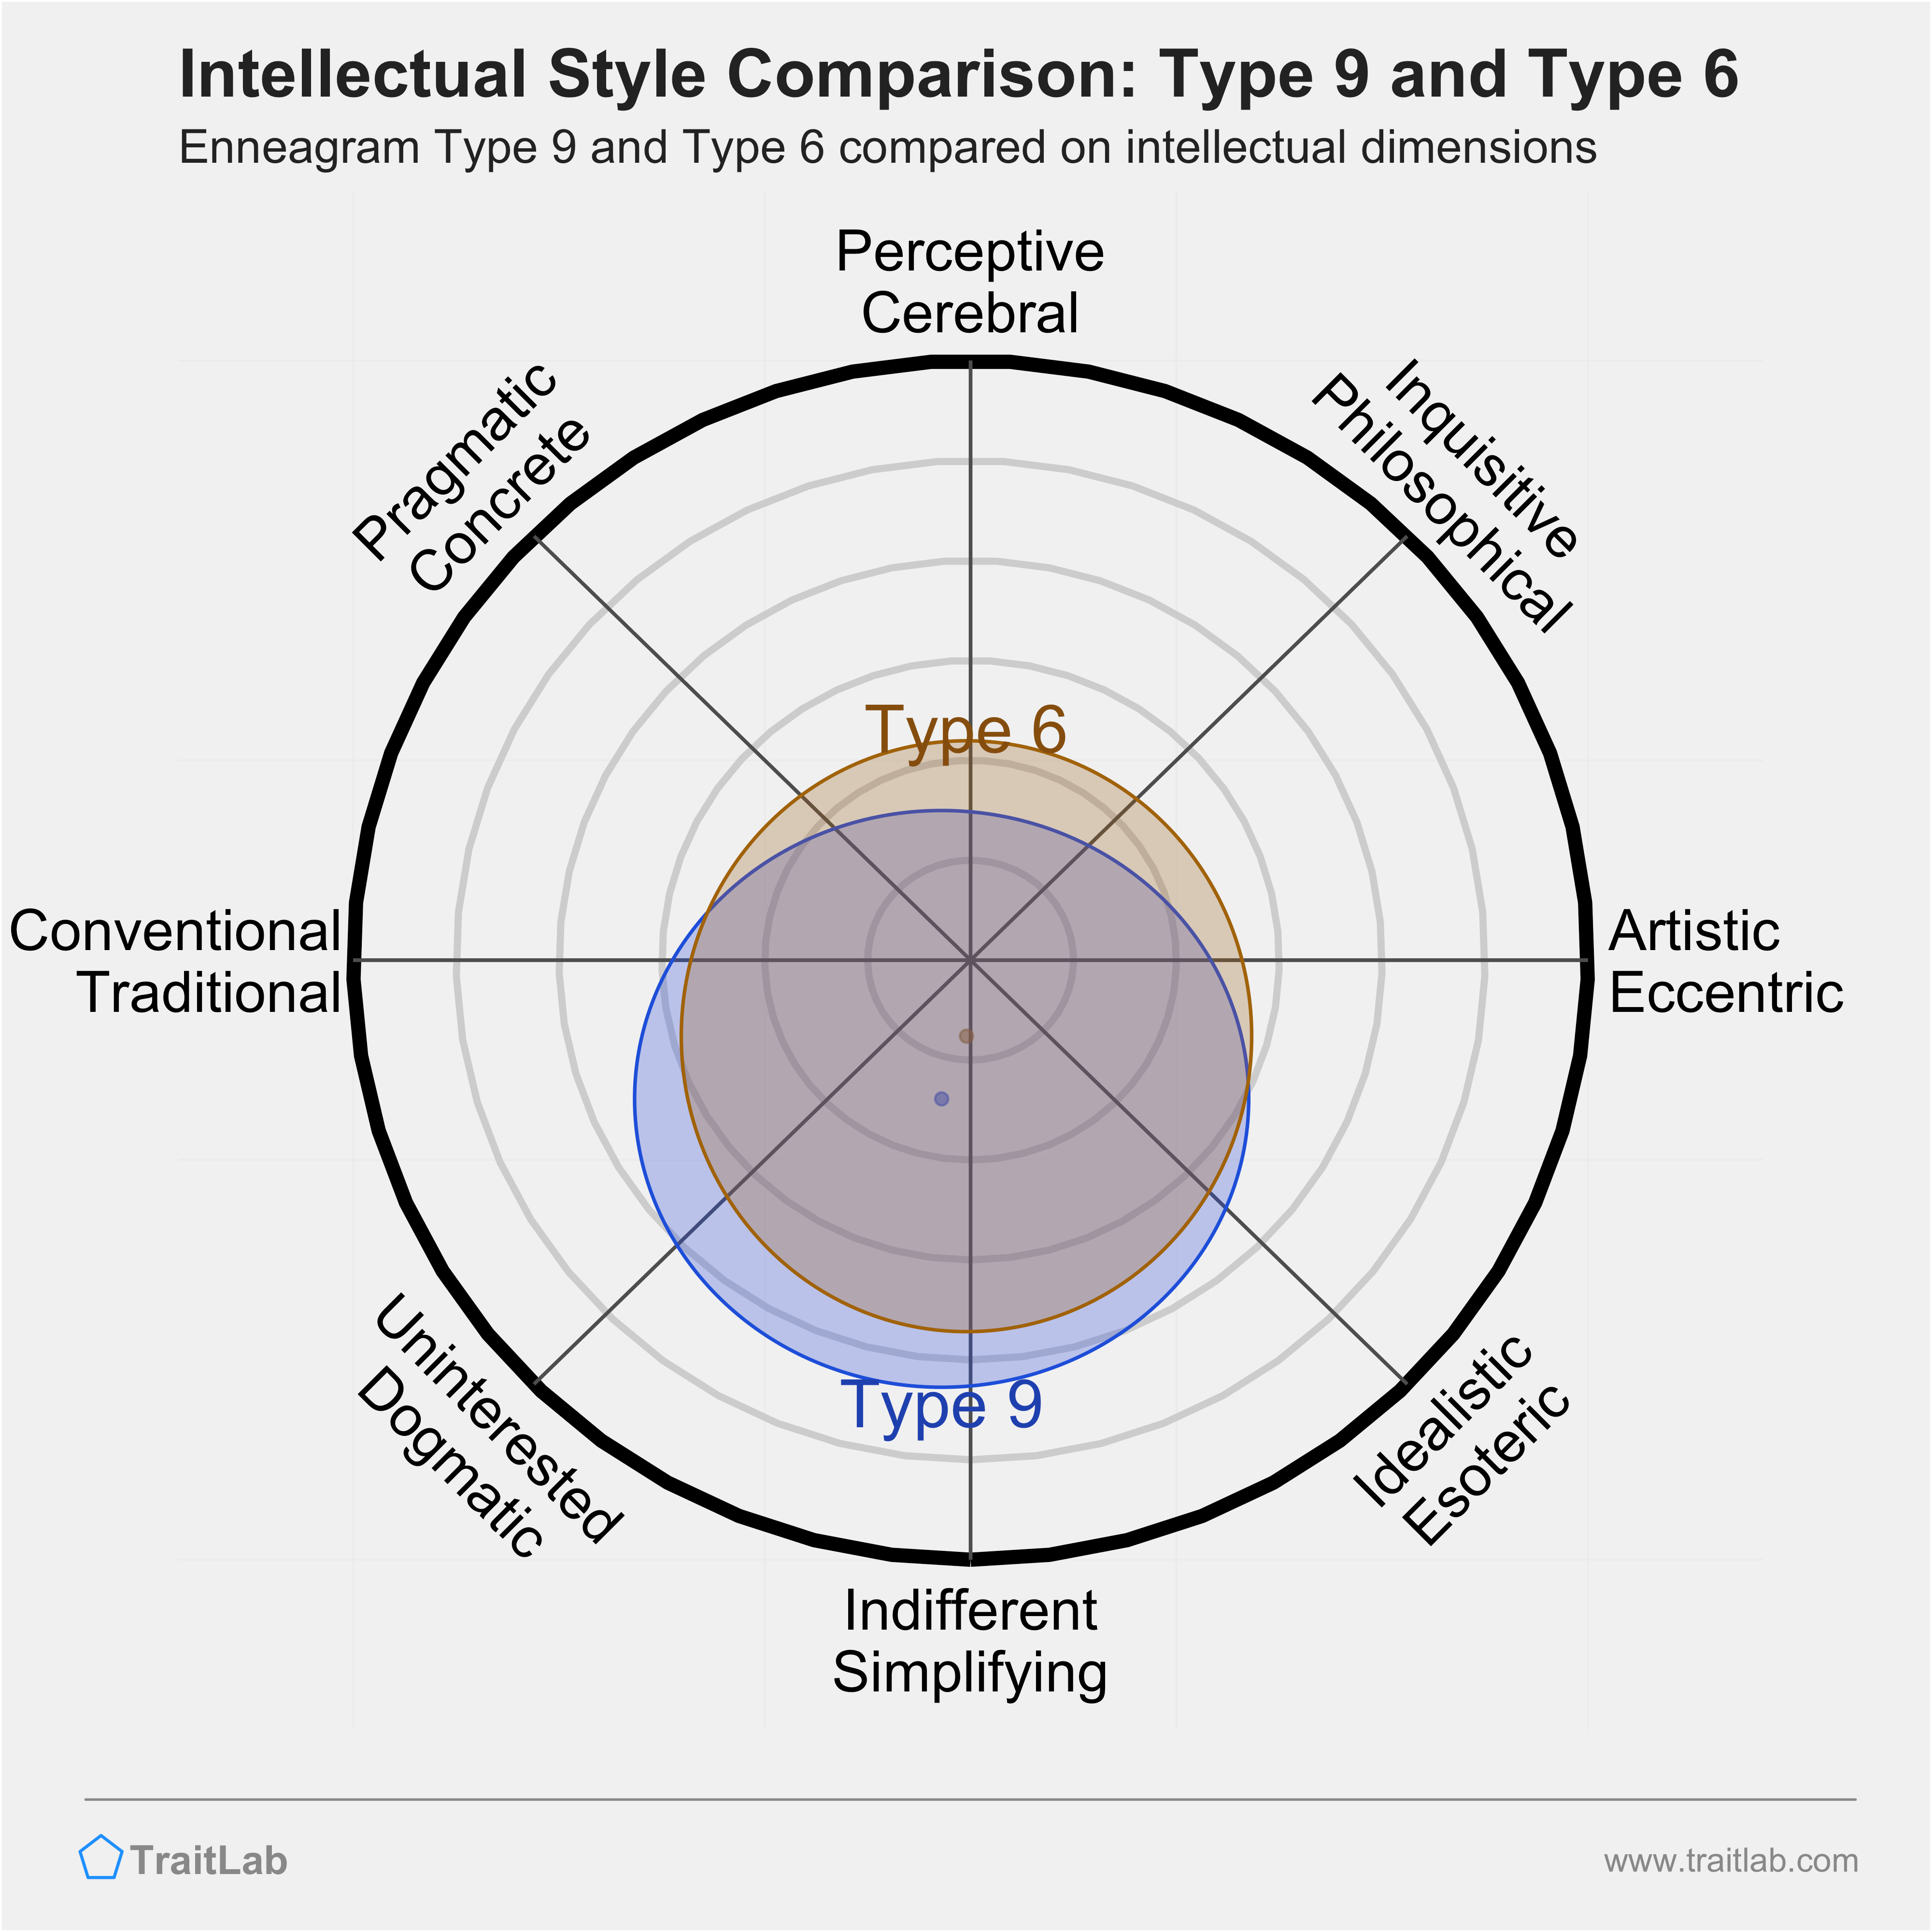 Type 9 and Type 6 comparison across intellectual dimensions